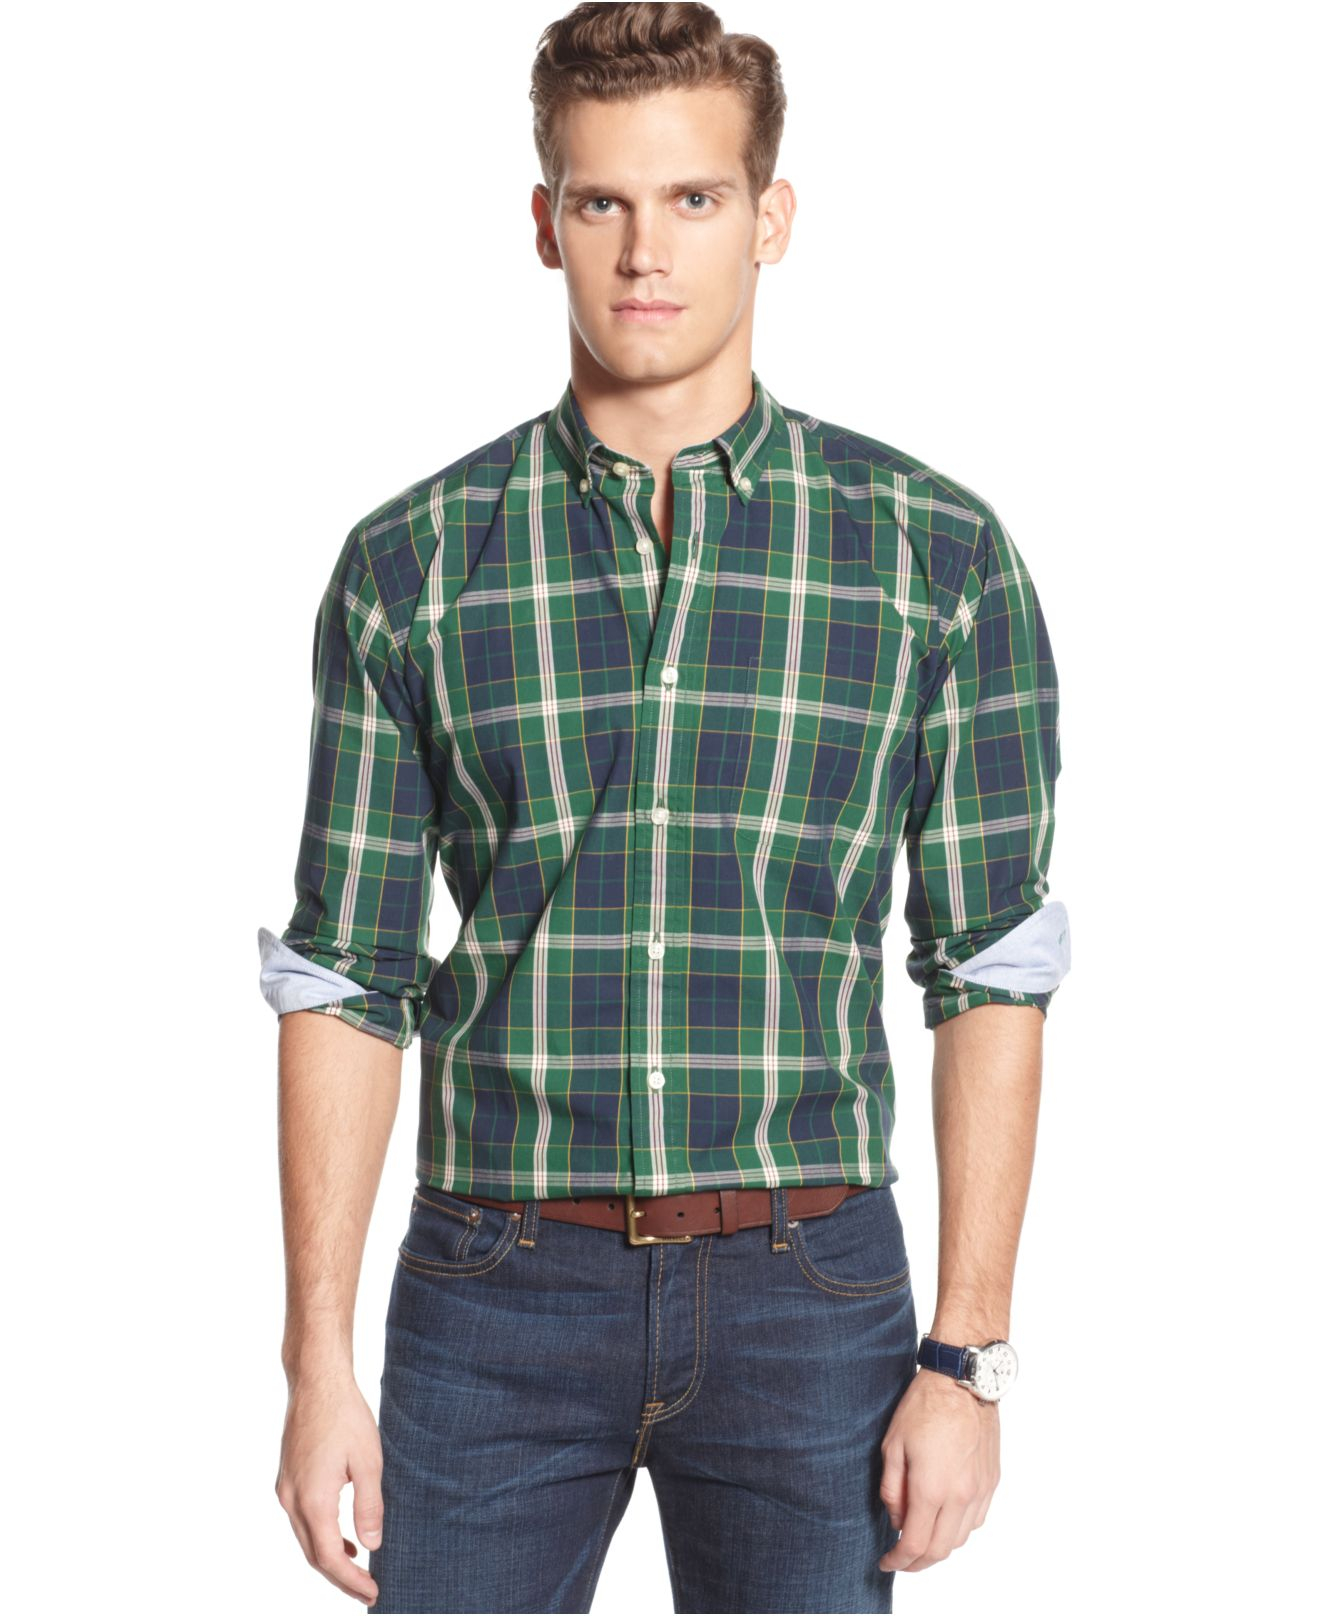 Lyst - Tommy Hilfiger Nelson Plaid Shirt in Green for Men